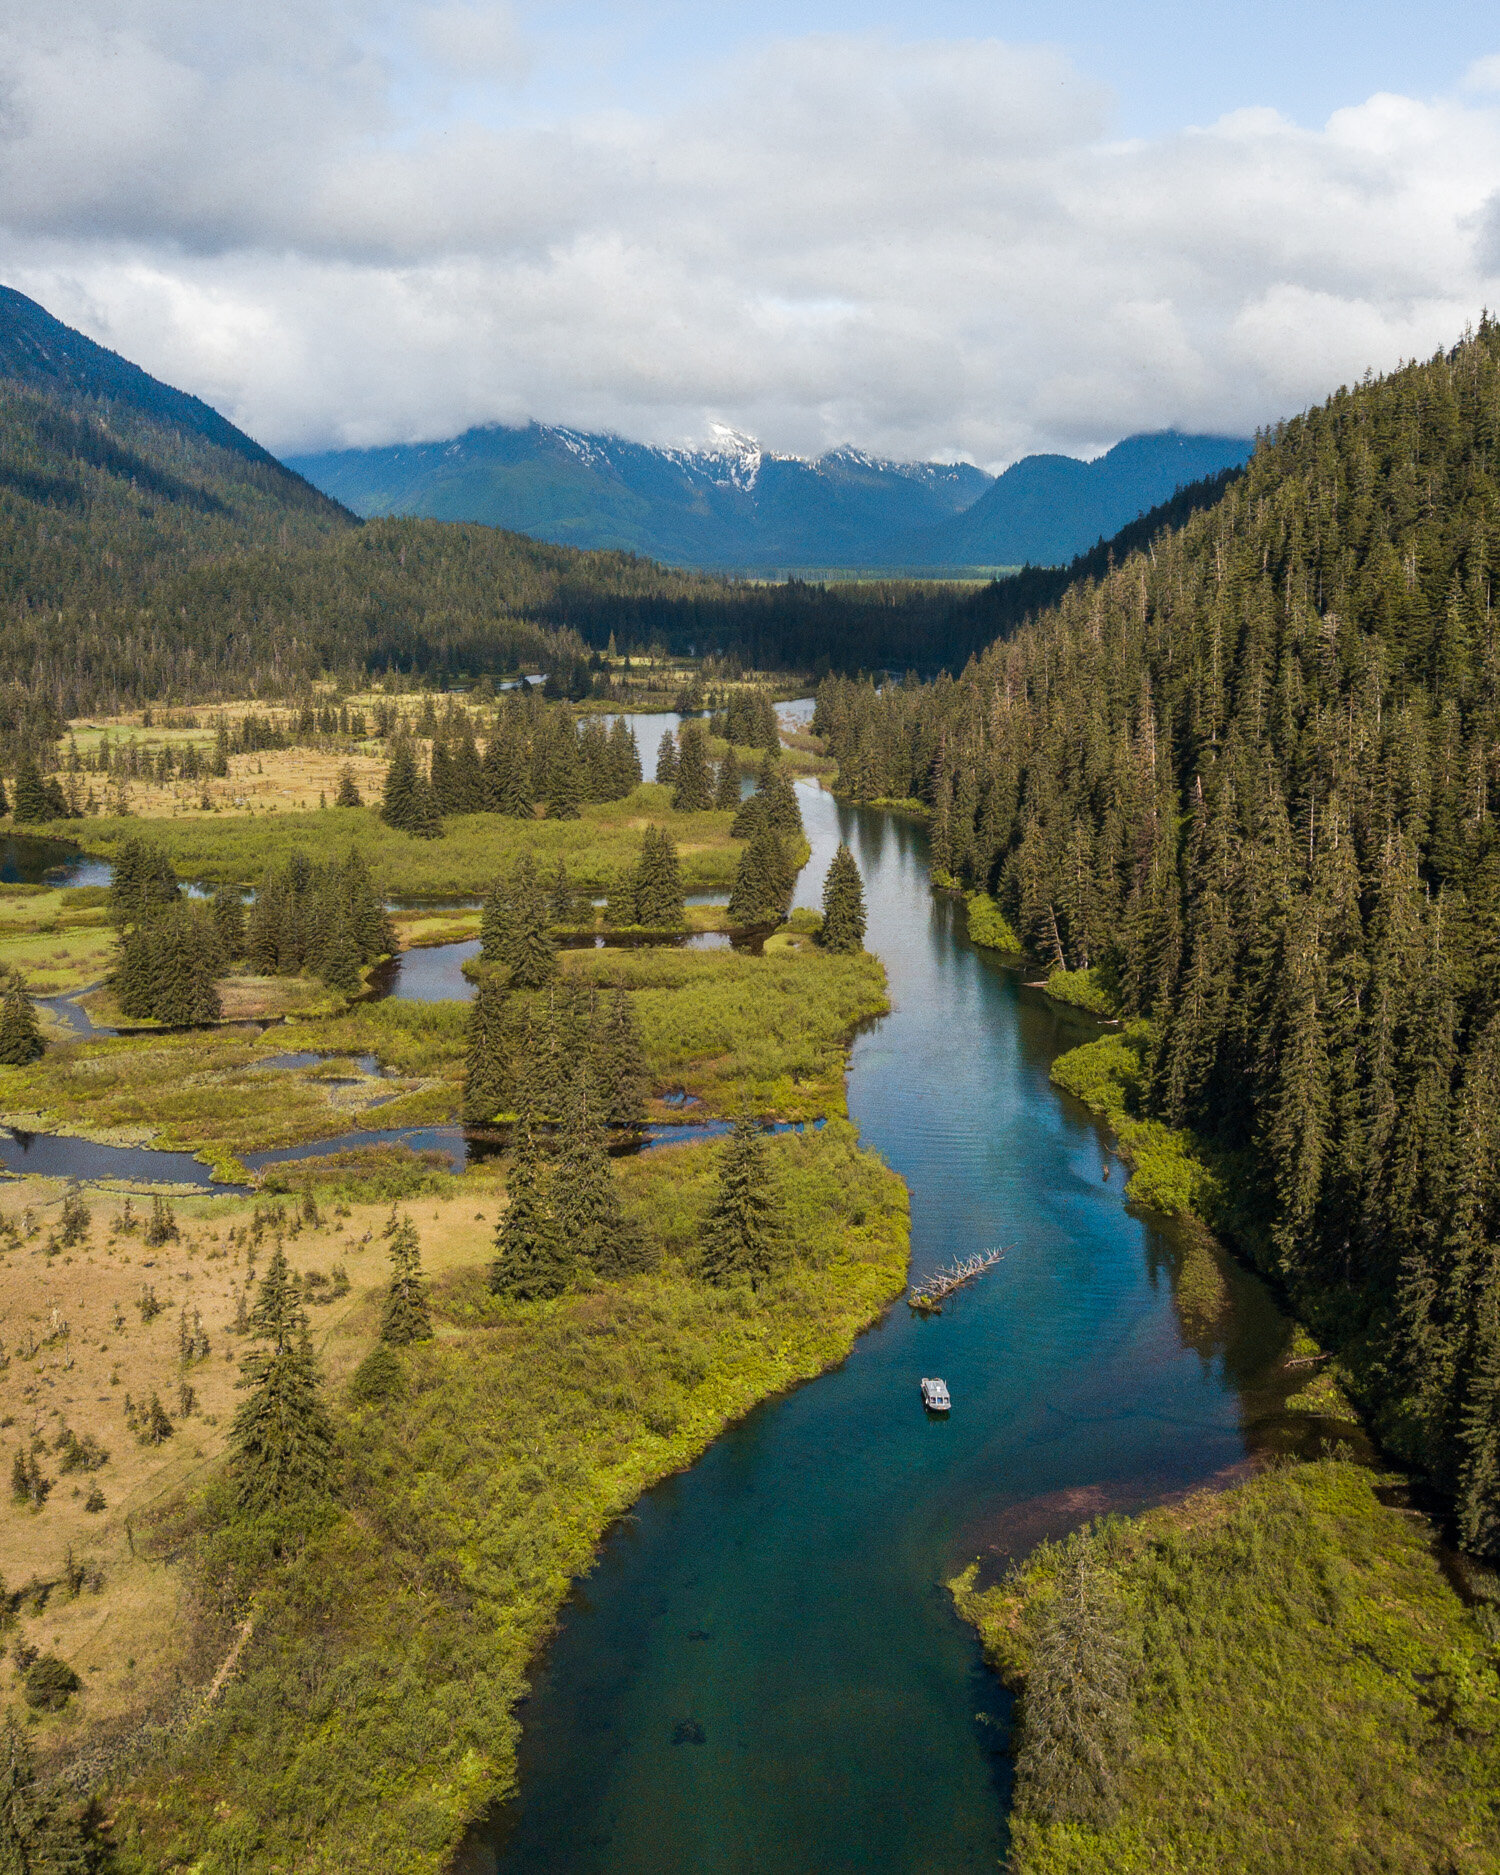 Boating up the Stikine River in Wrangell // 10 Things You Have To Do in Southeast Alaska